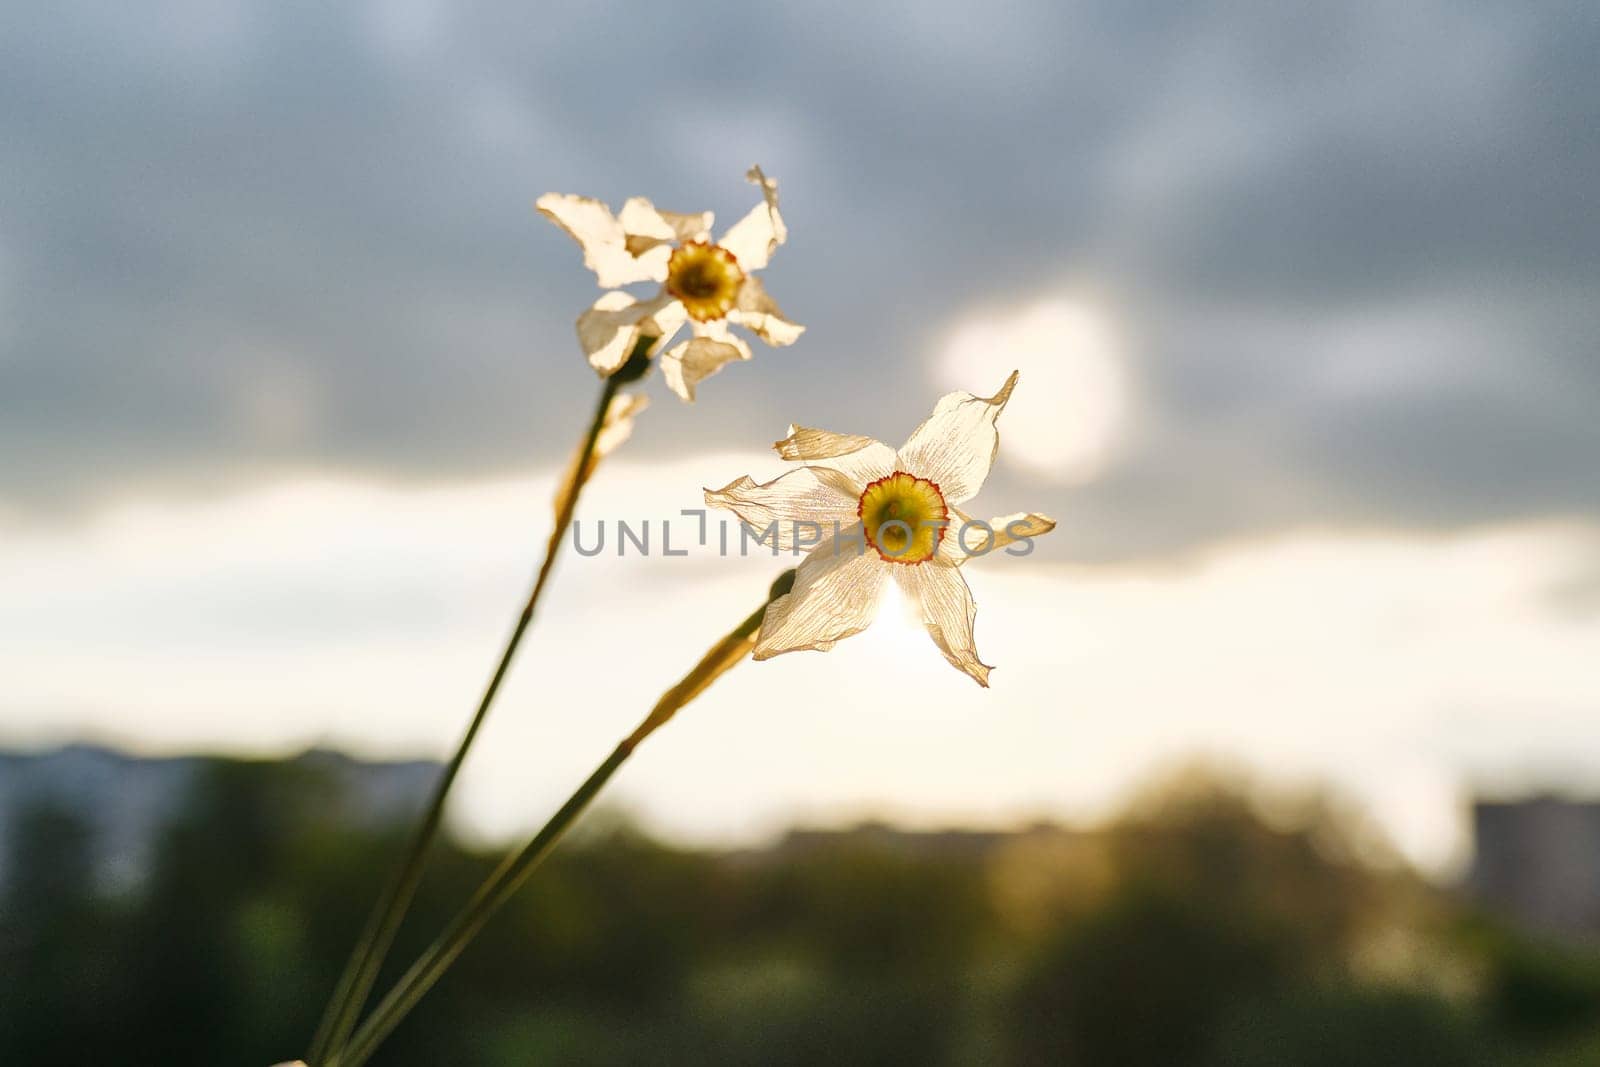 Two withered flowers of white daffodil in hand woman, dramatic evening sunset sky with clouds by VH-studio